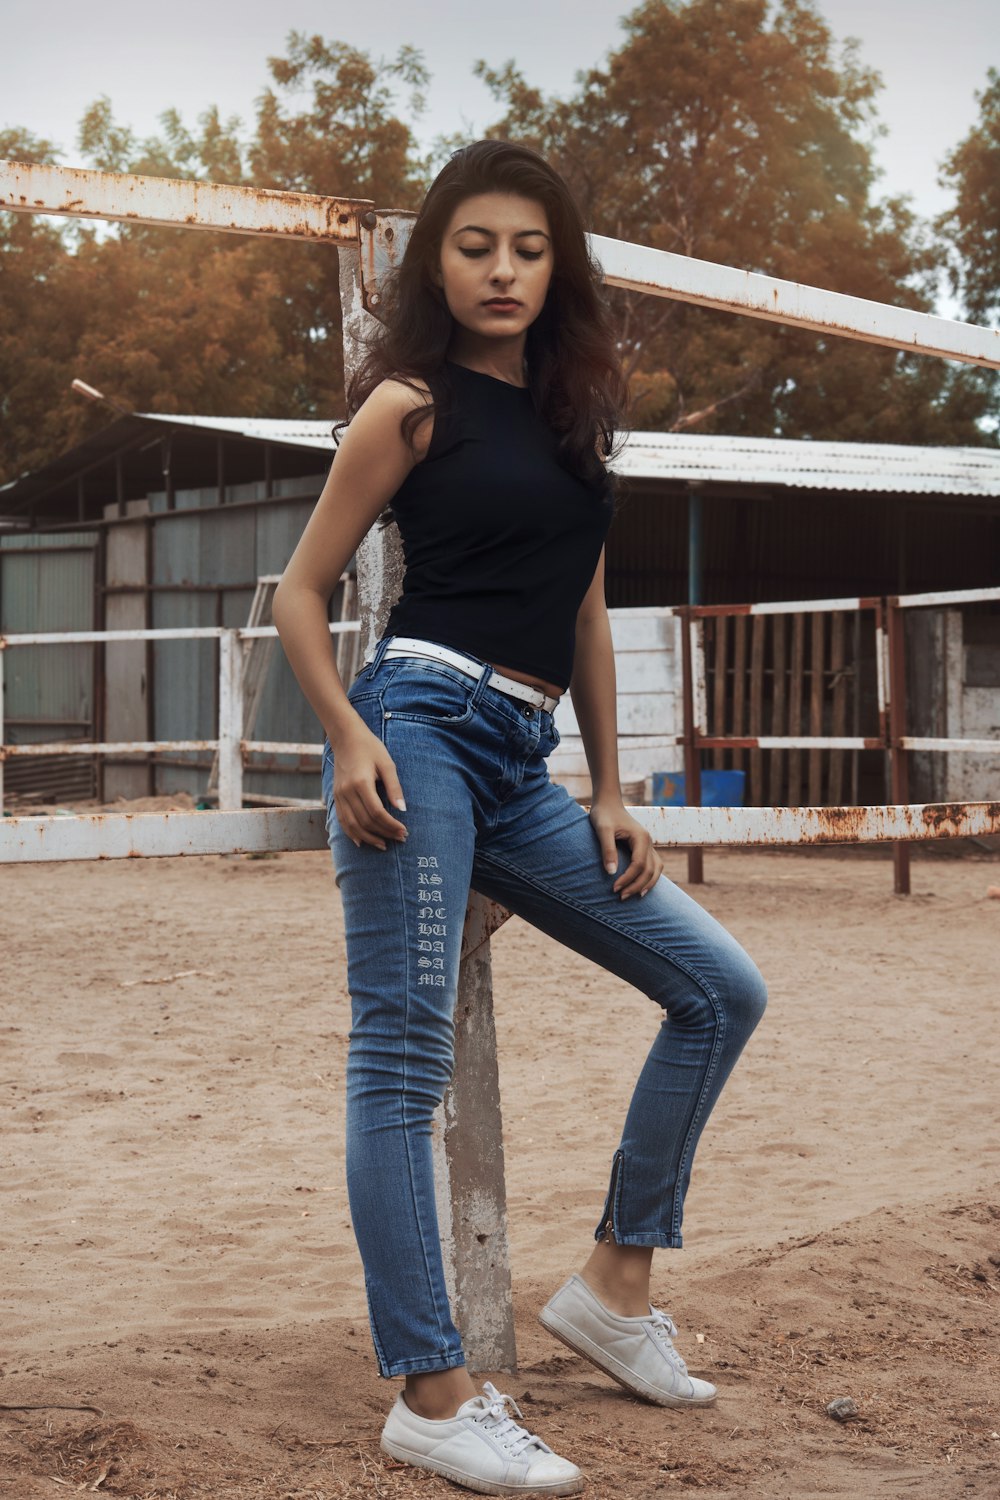 woman in black tank top and blue denim jeans standing on brown sand during daytime